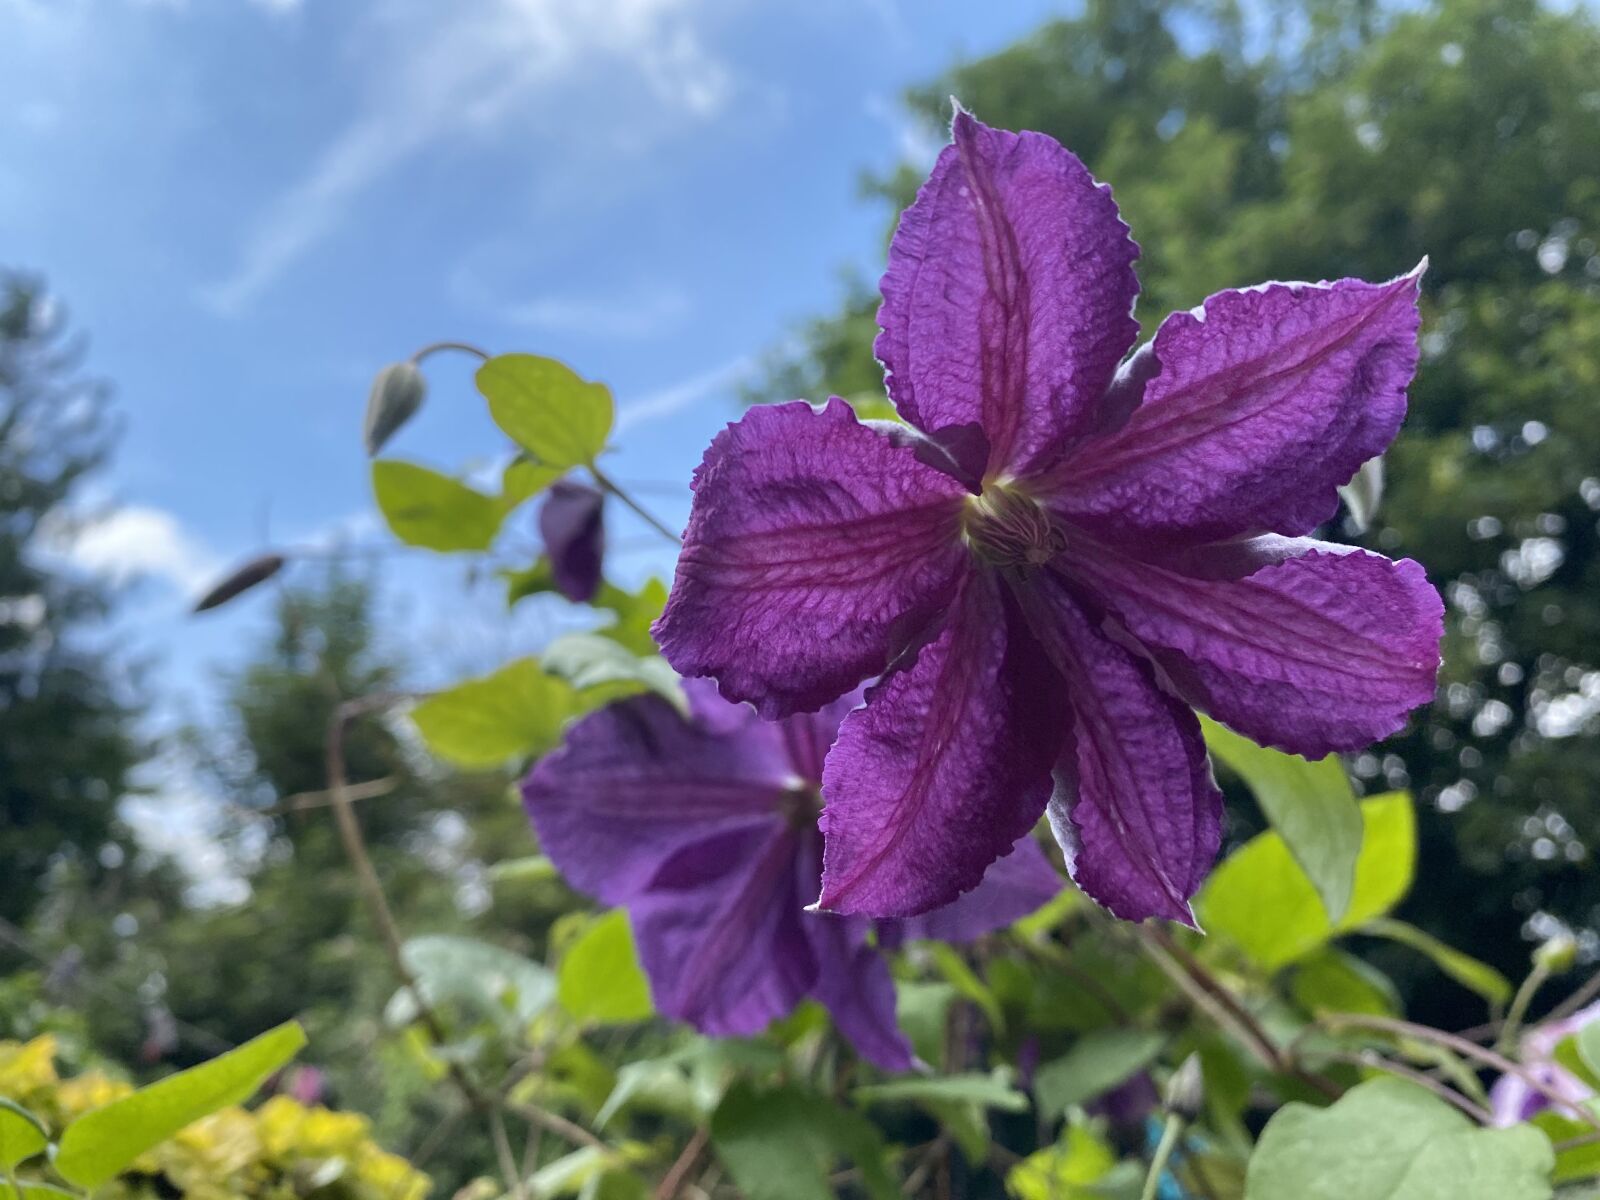 iPhone 11 Pro Max back triple camera 4.25mm f/1.8 sample photo. Flower, summer, blossom photography